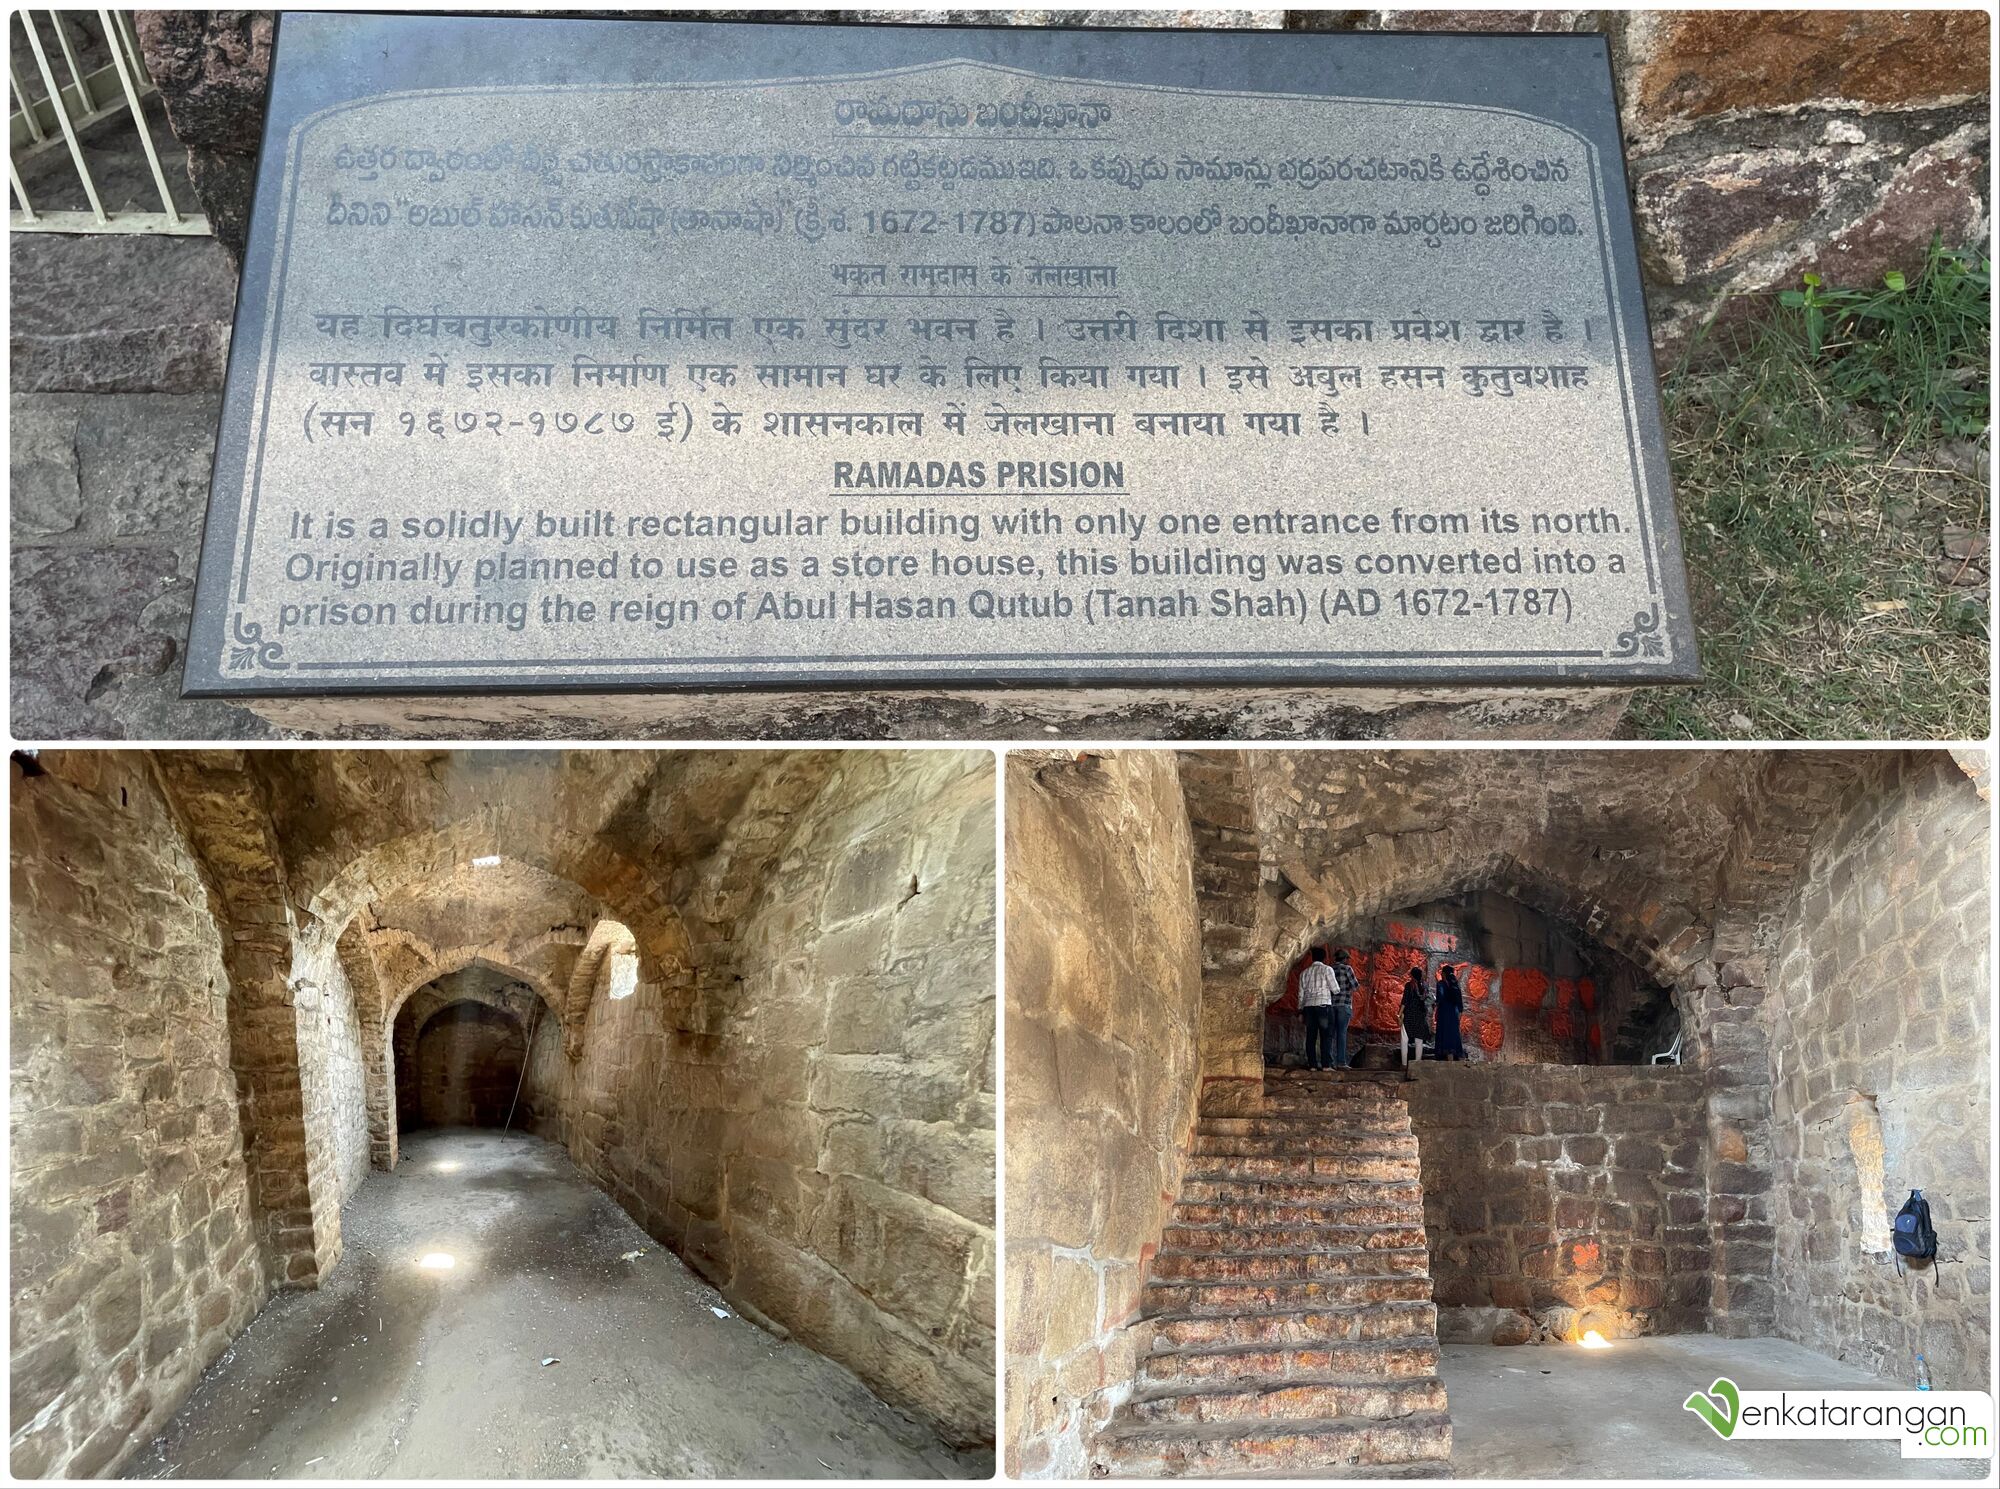 Sri Ramadas Prison, Golconda Fort - It is a solidly built rectangular building with only one entrance from its north